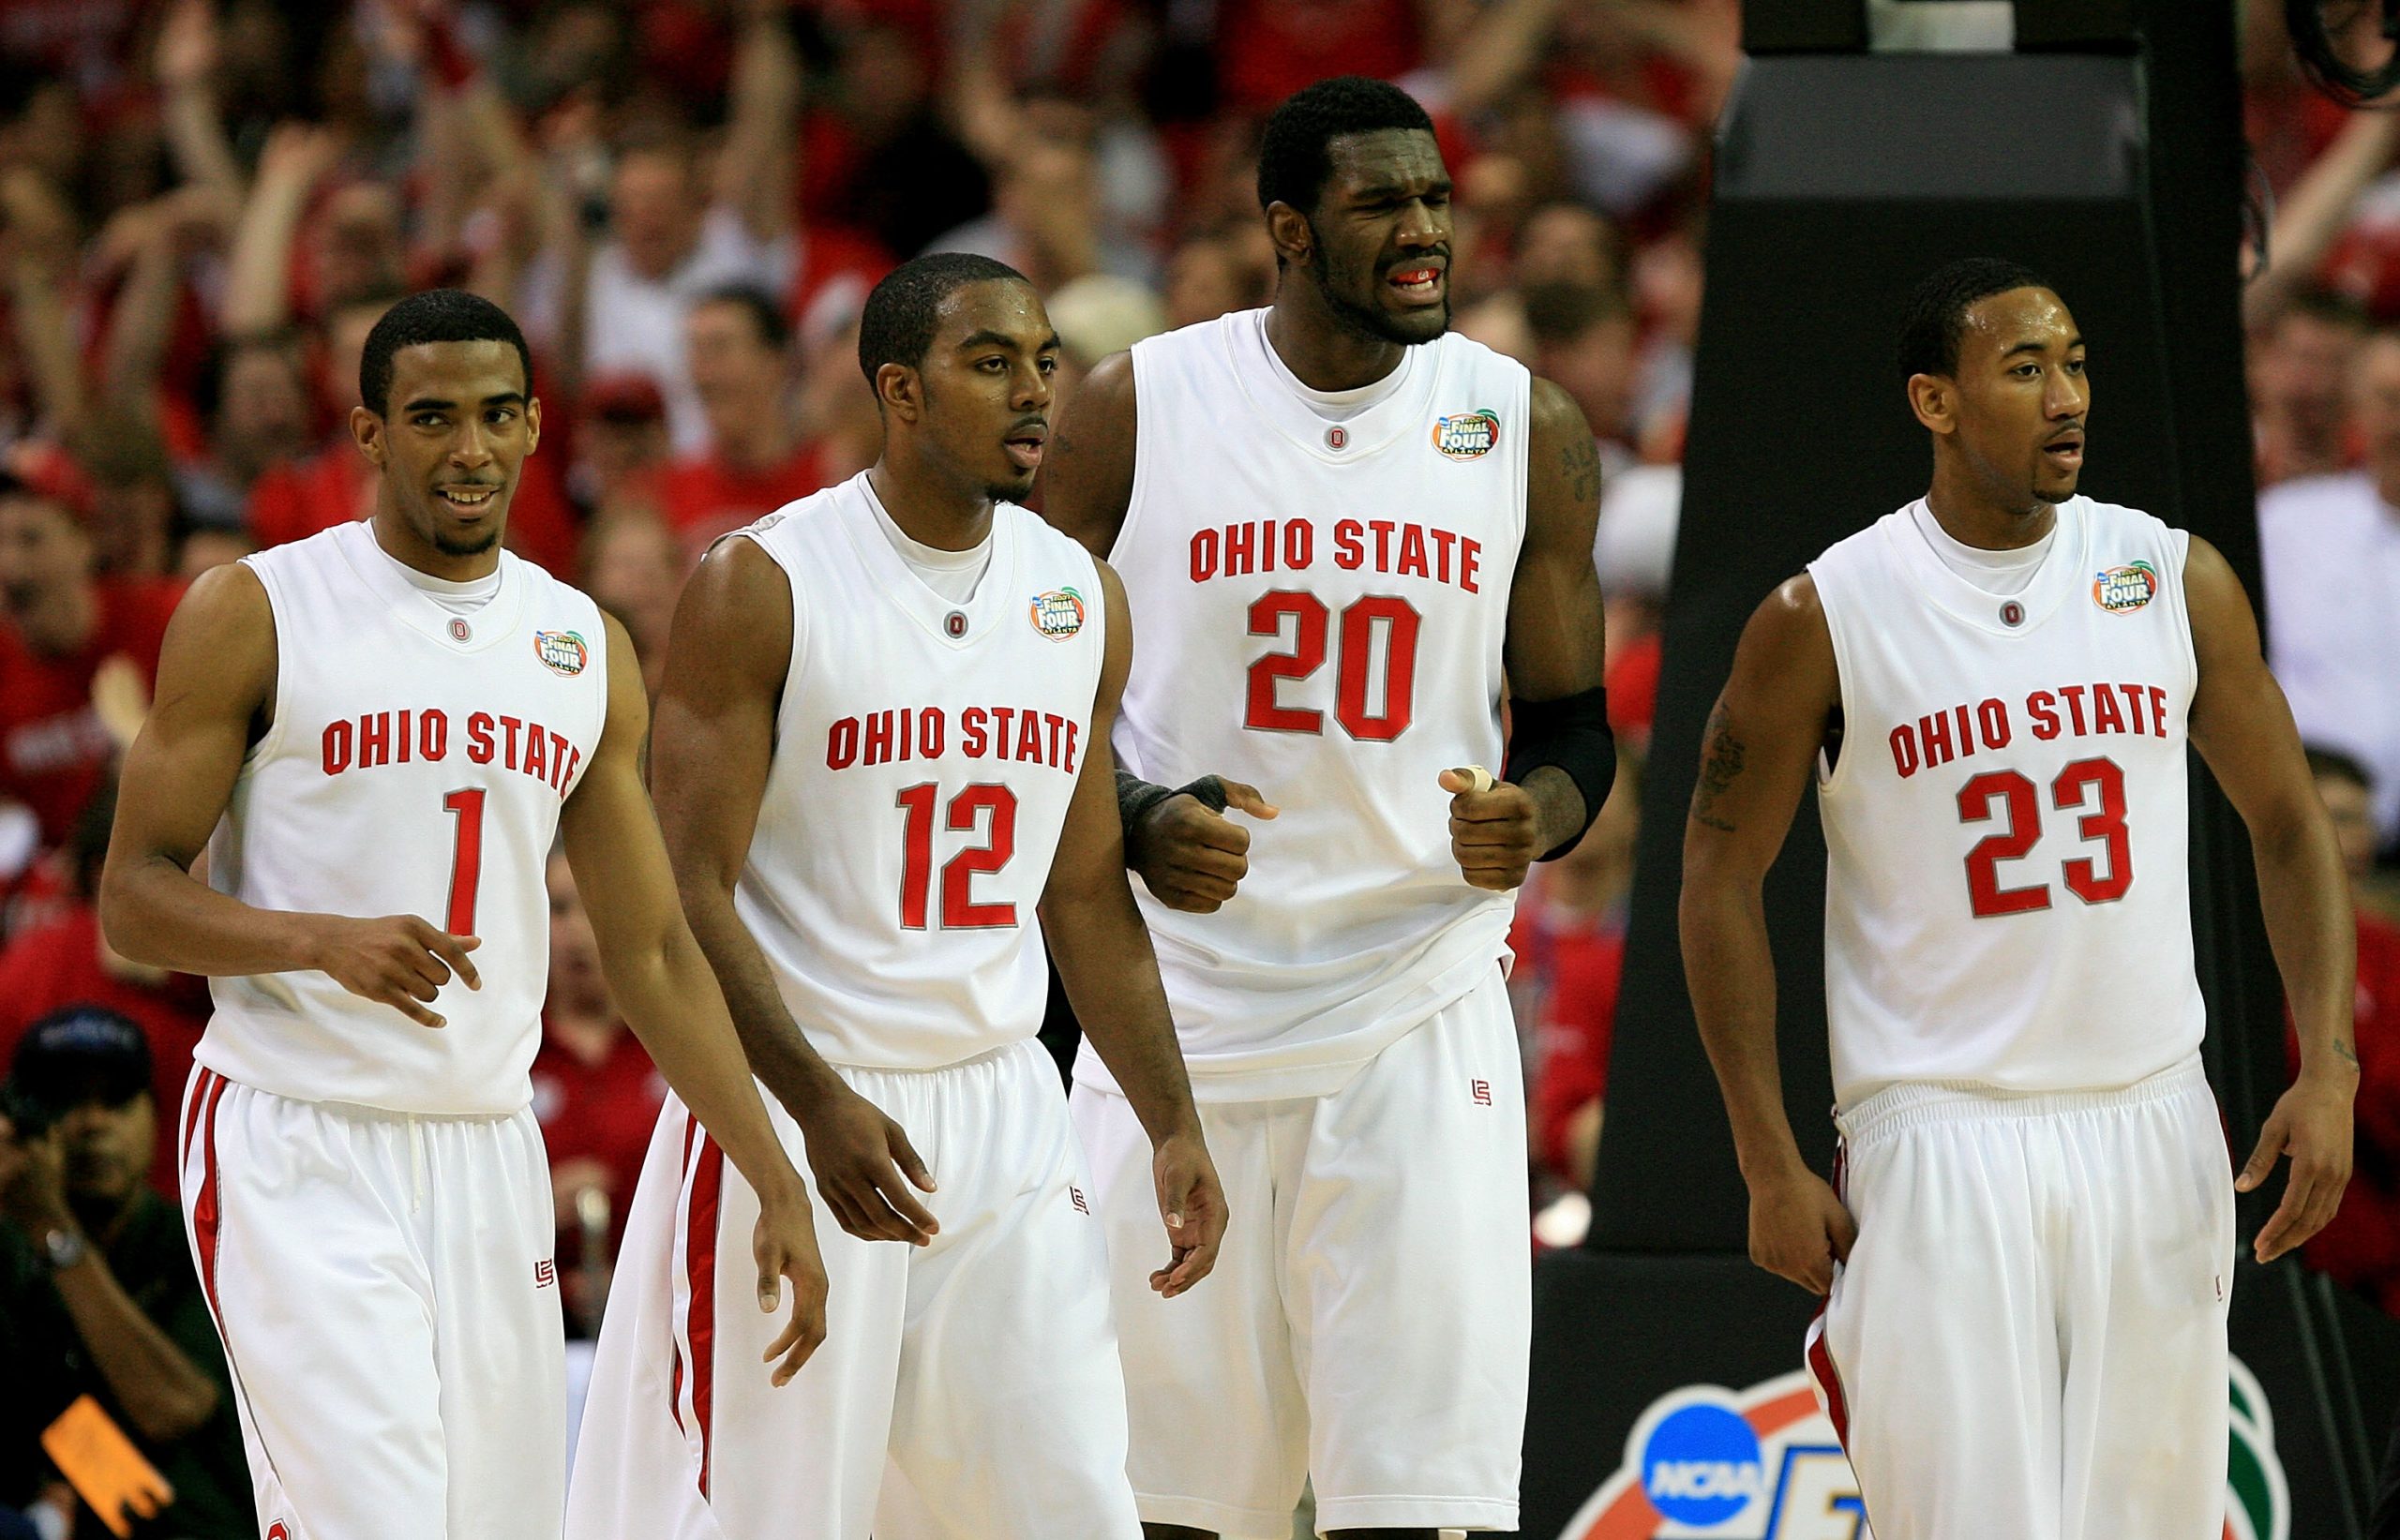 The 30 Most Influential NCAA MBB Teams of SLAM’s 30 Years: ’07 Ohio State